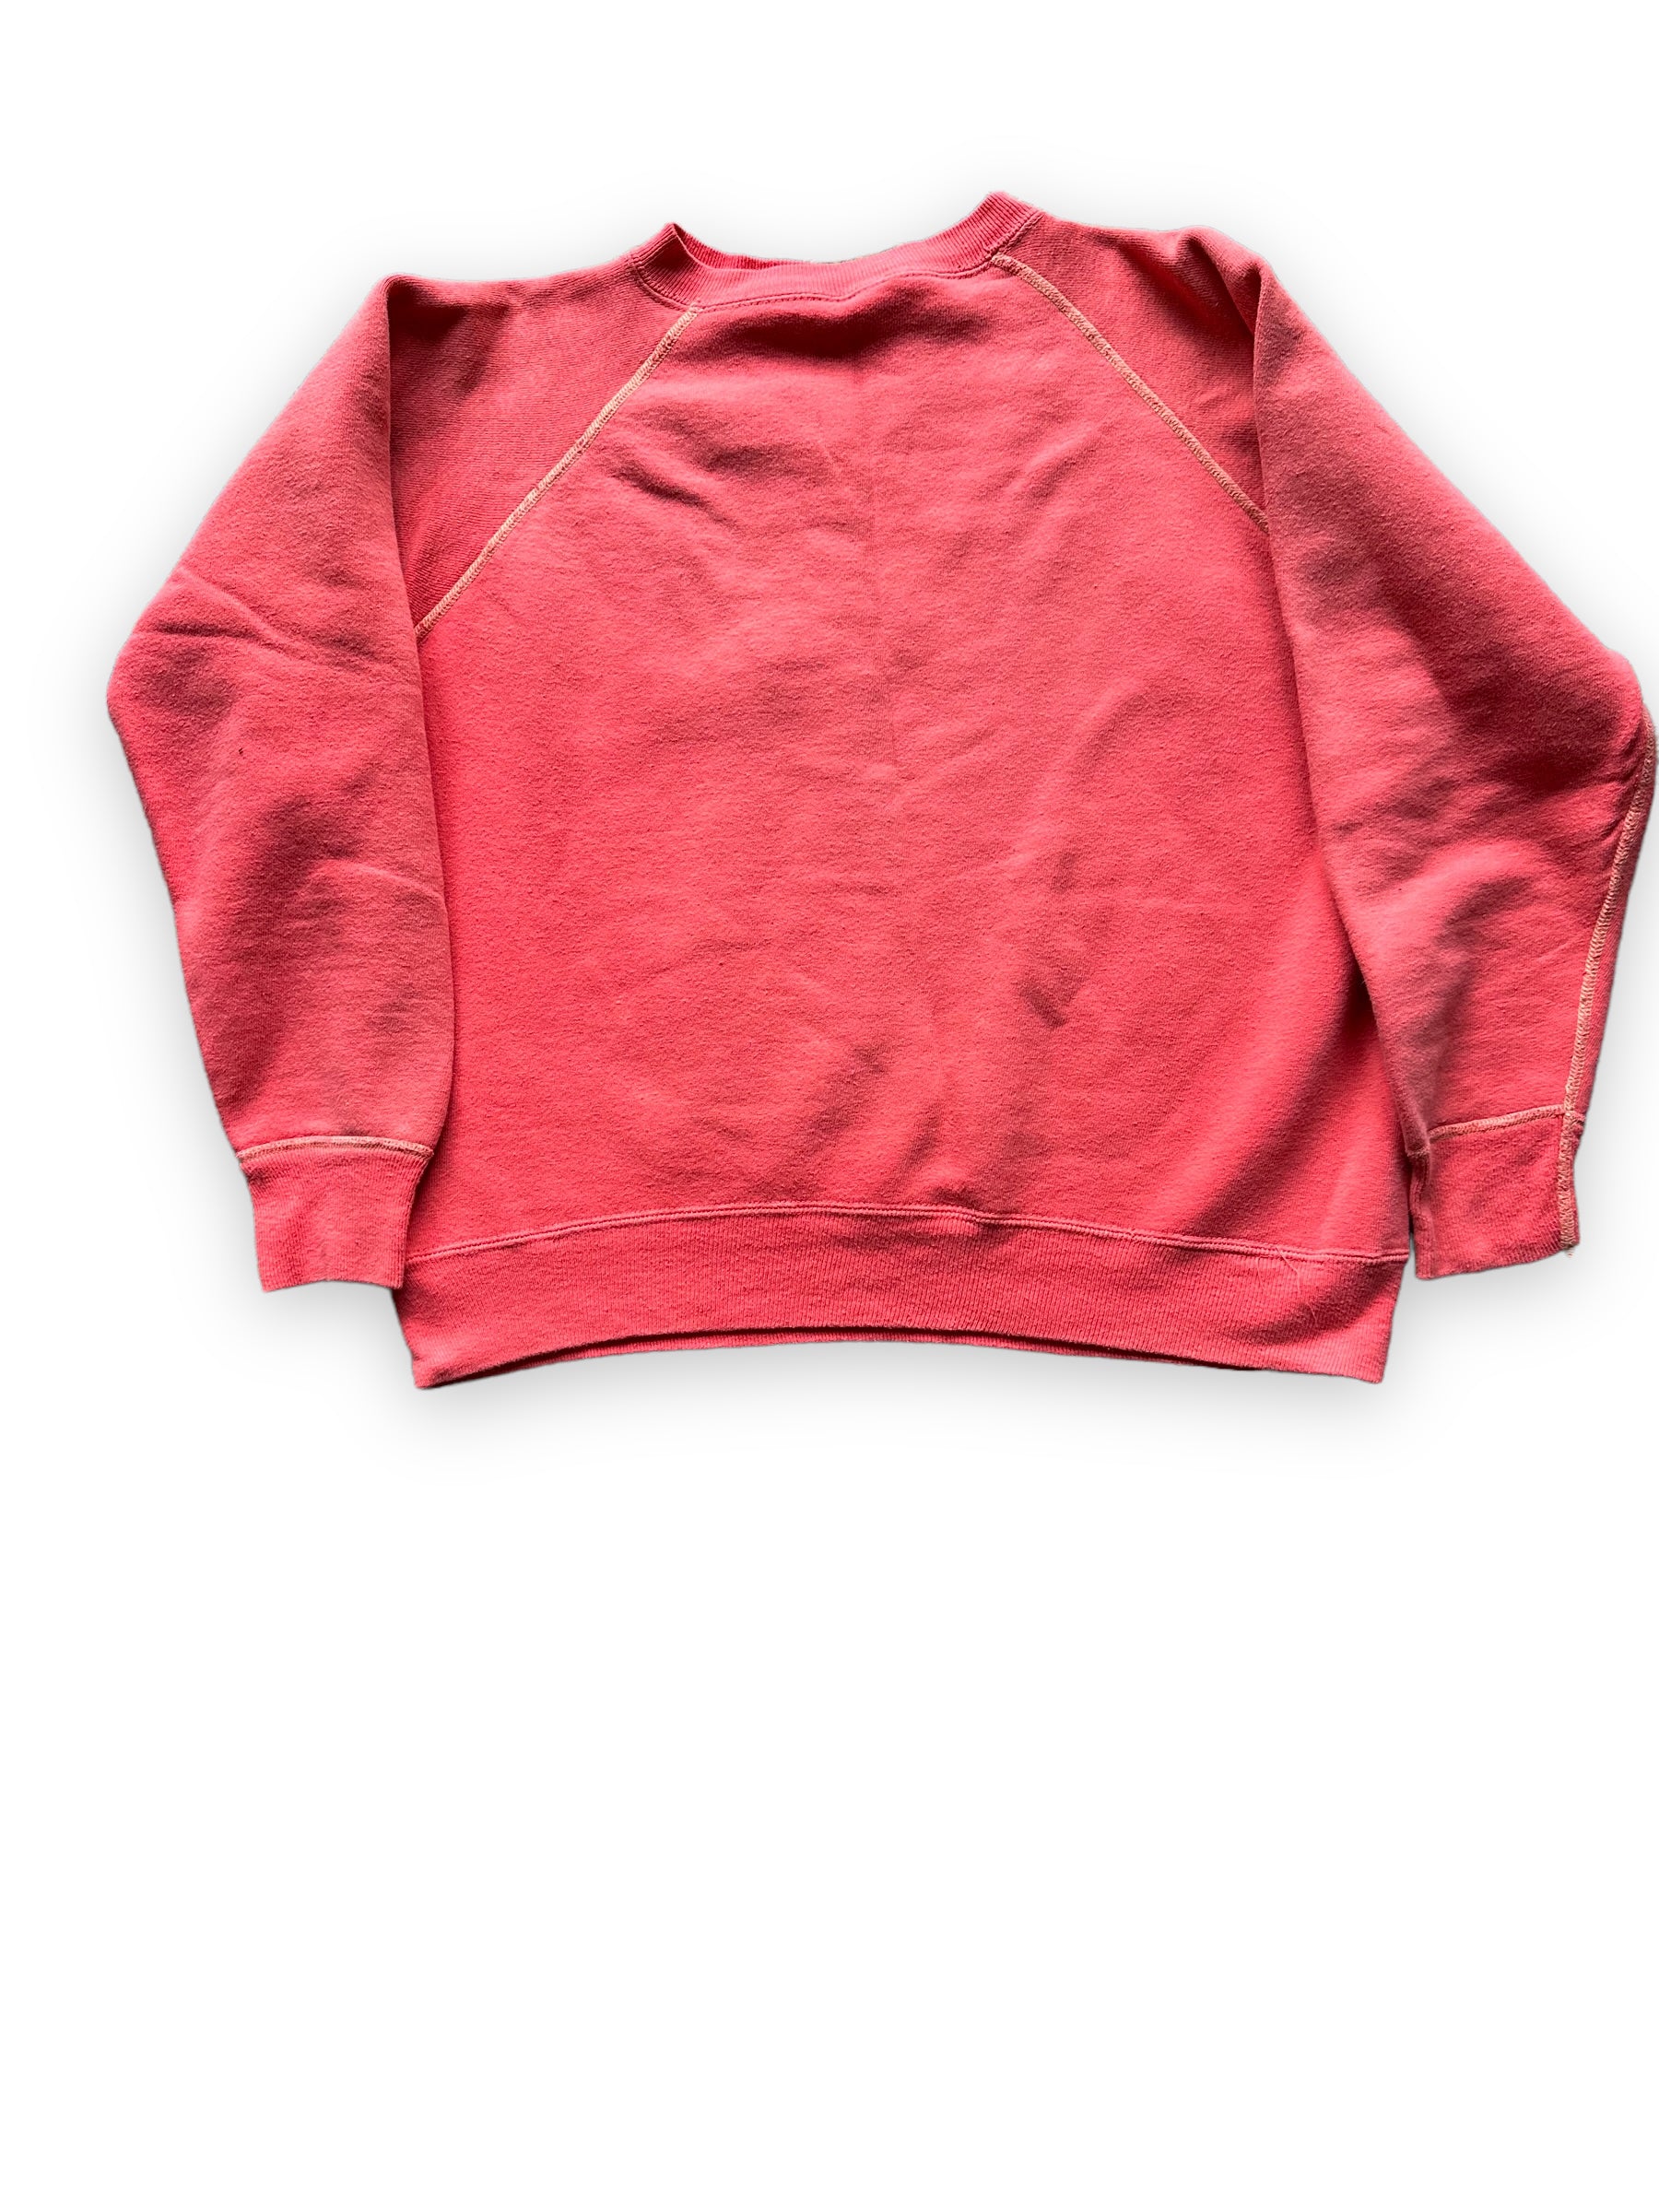 Front View of Vintage Faded Red Crewneck Sweatshirt | Vintage Crewneck Sweatshirt Seattle | Barn Owl Vintage Clothing